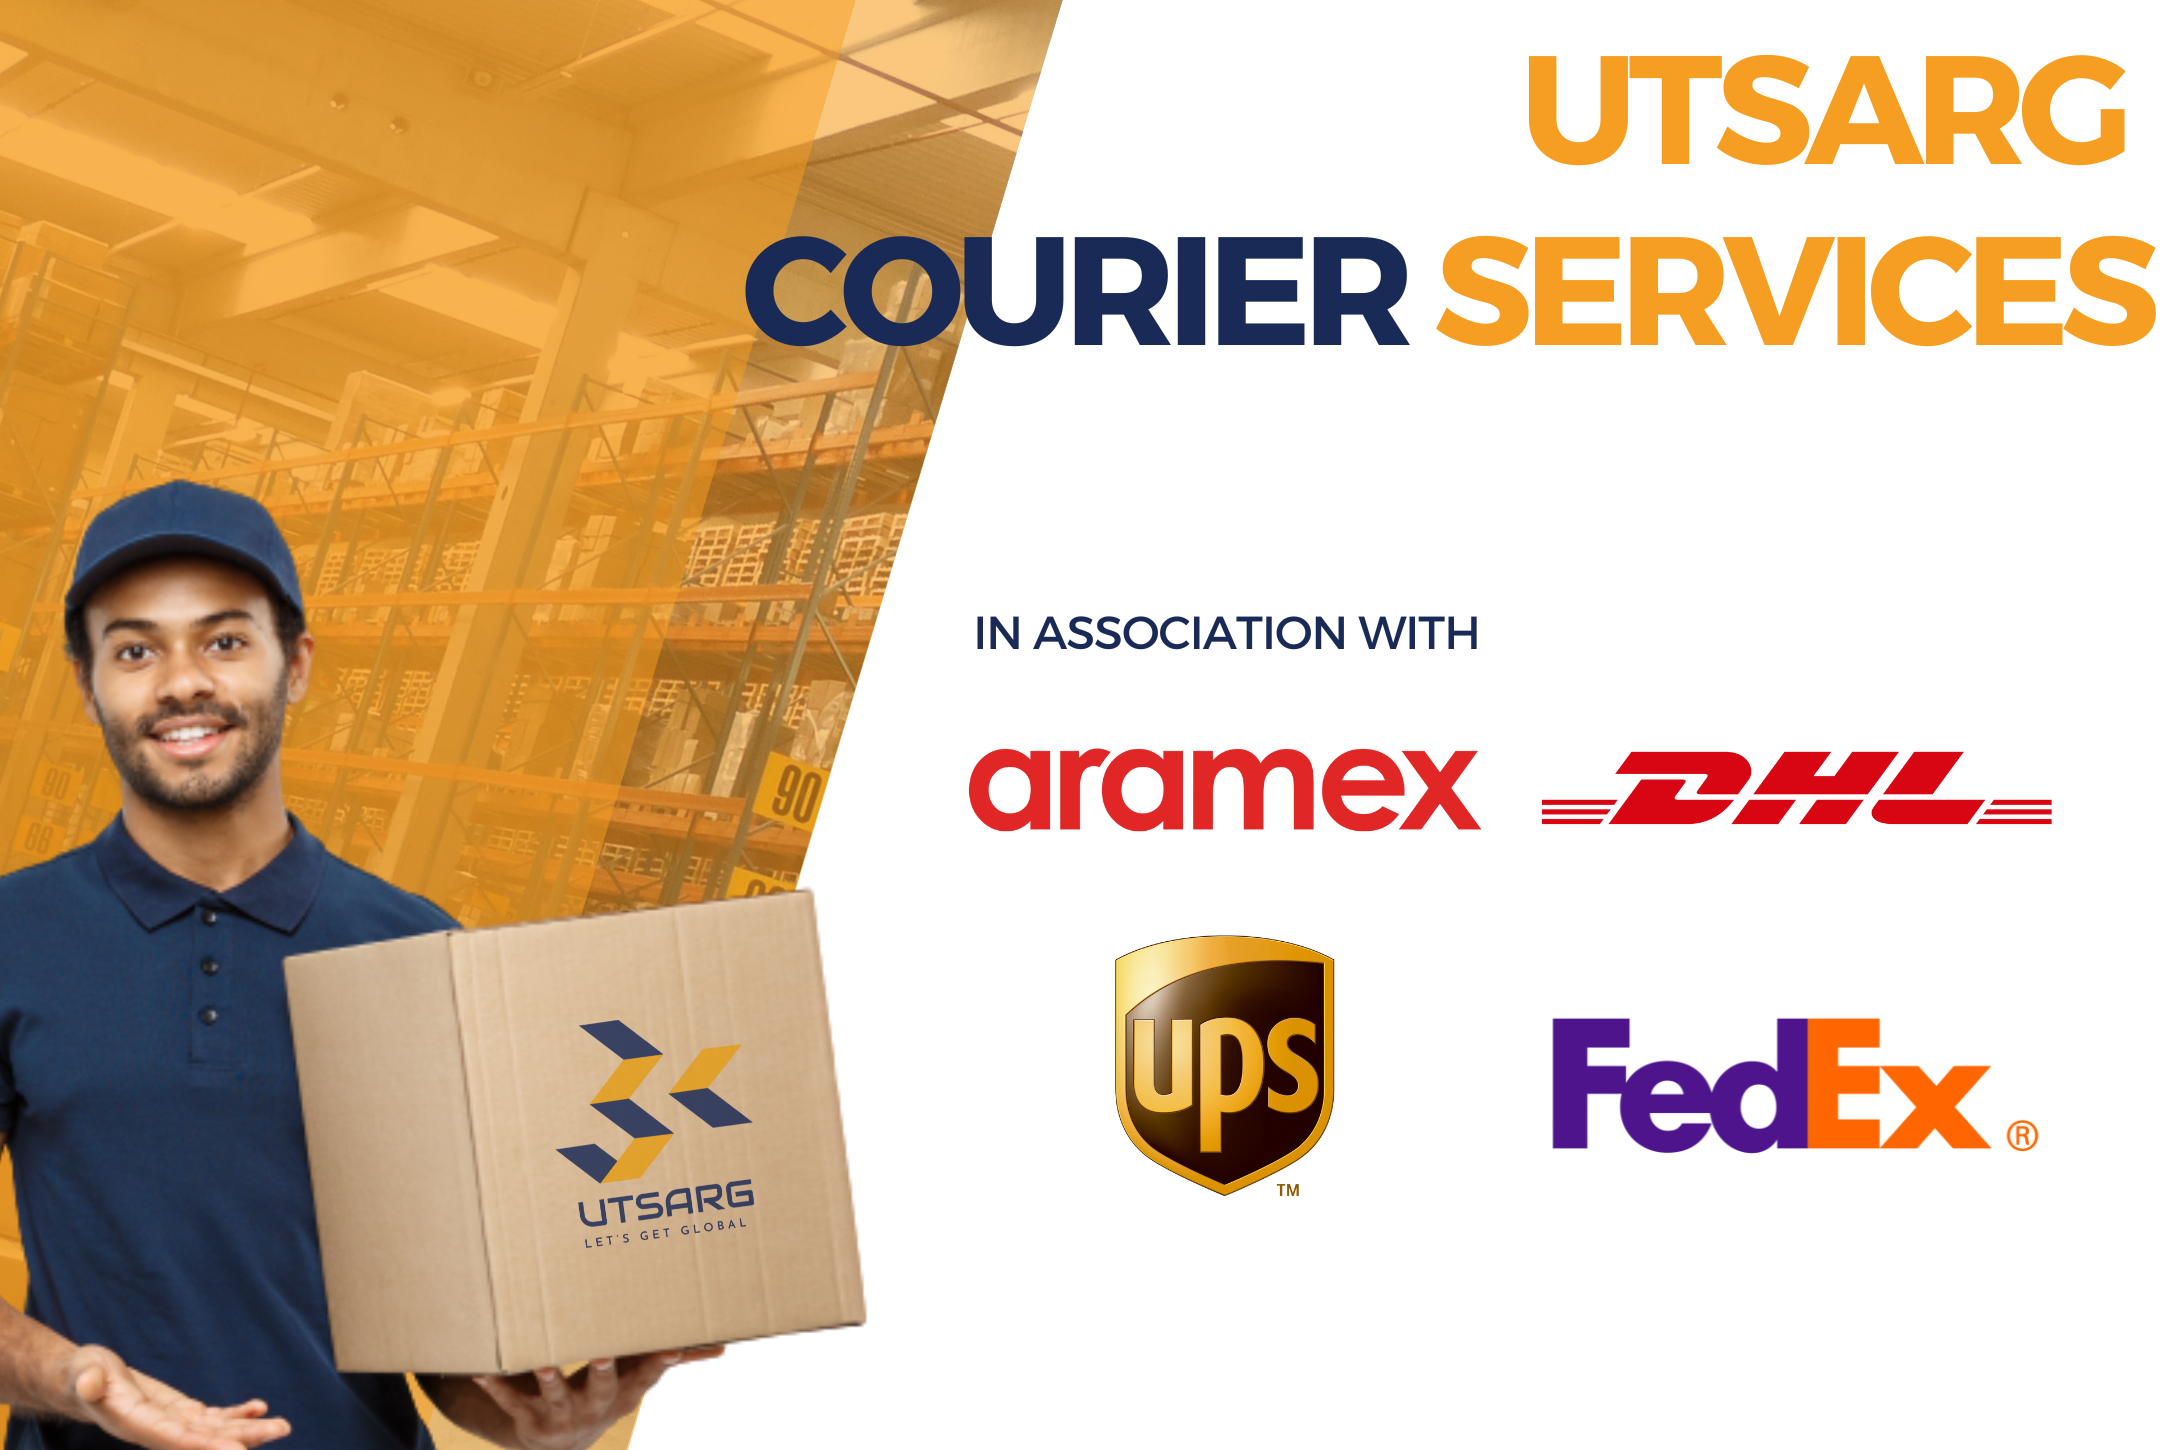 Utsarg Courier Services